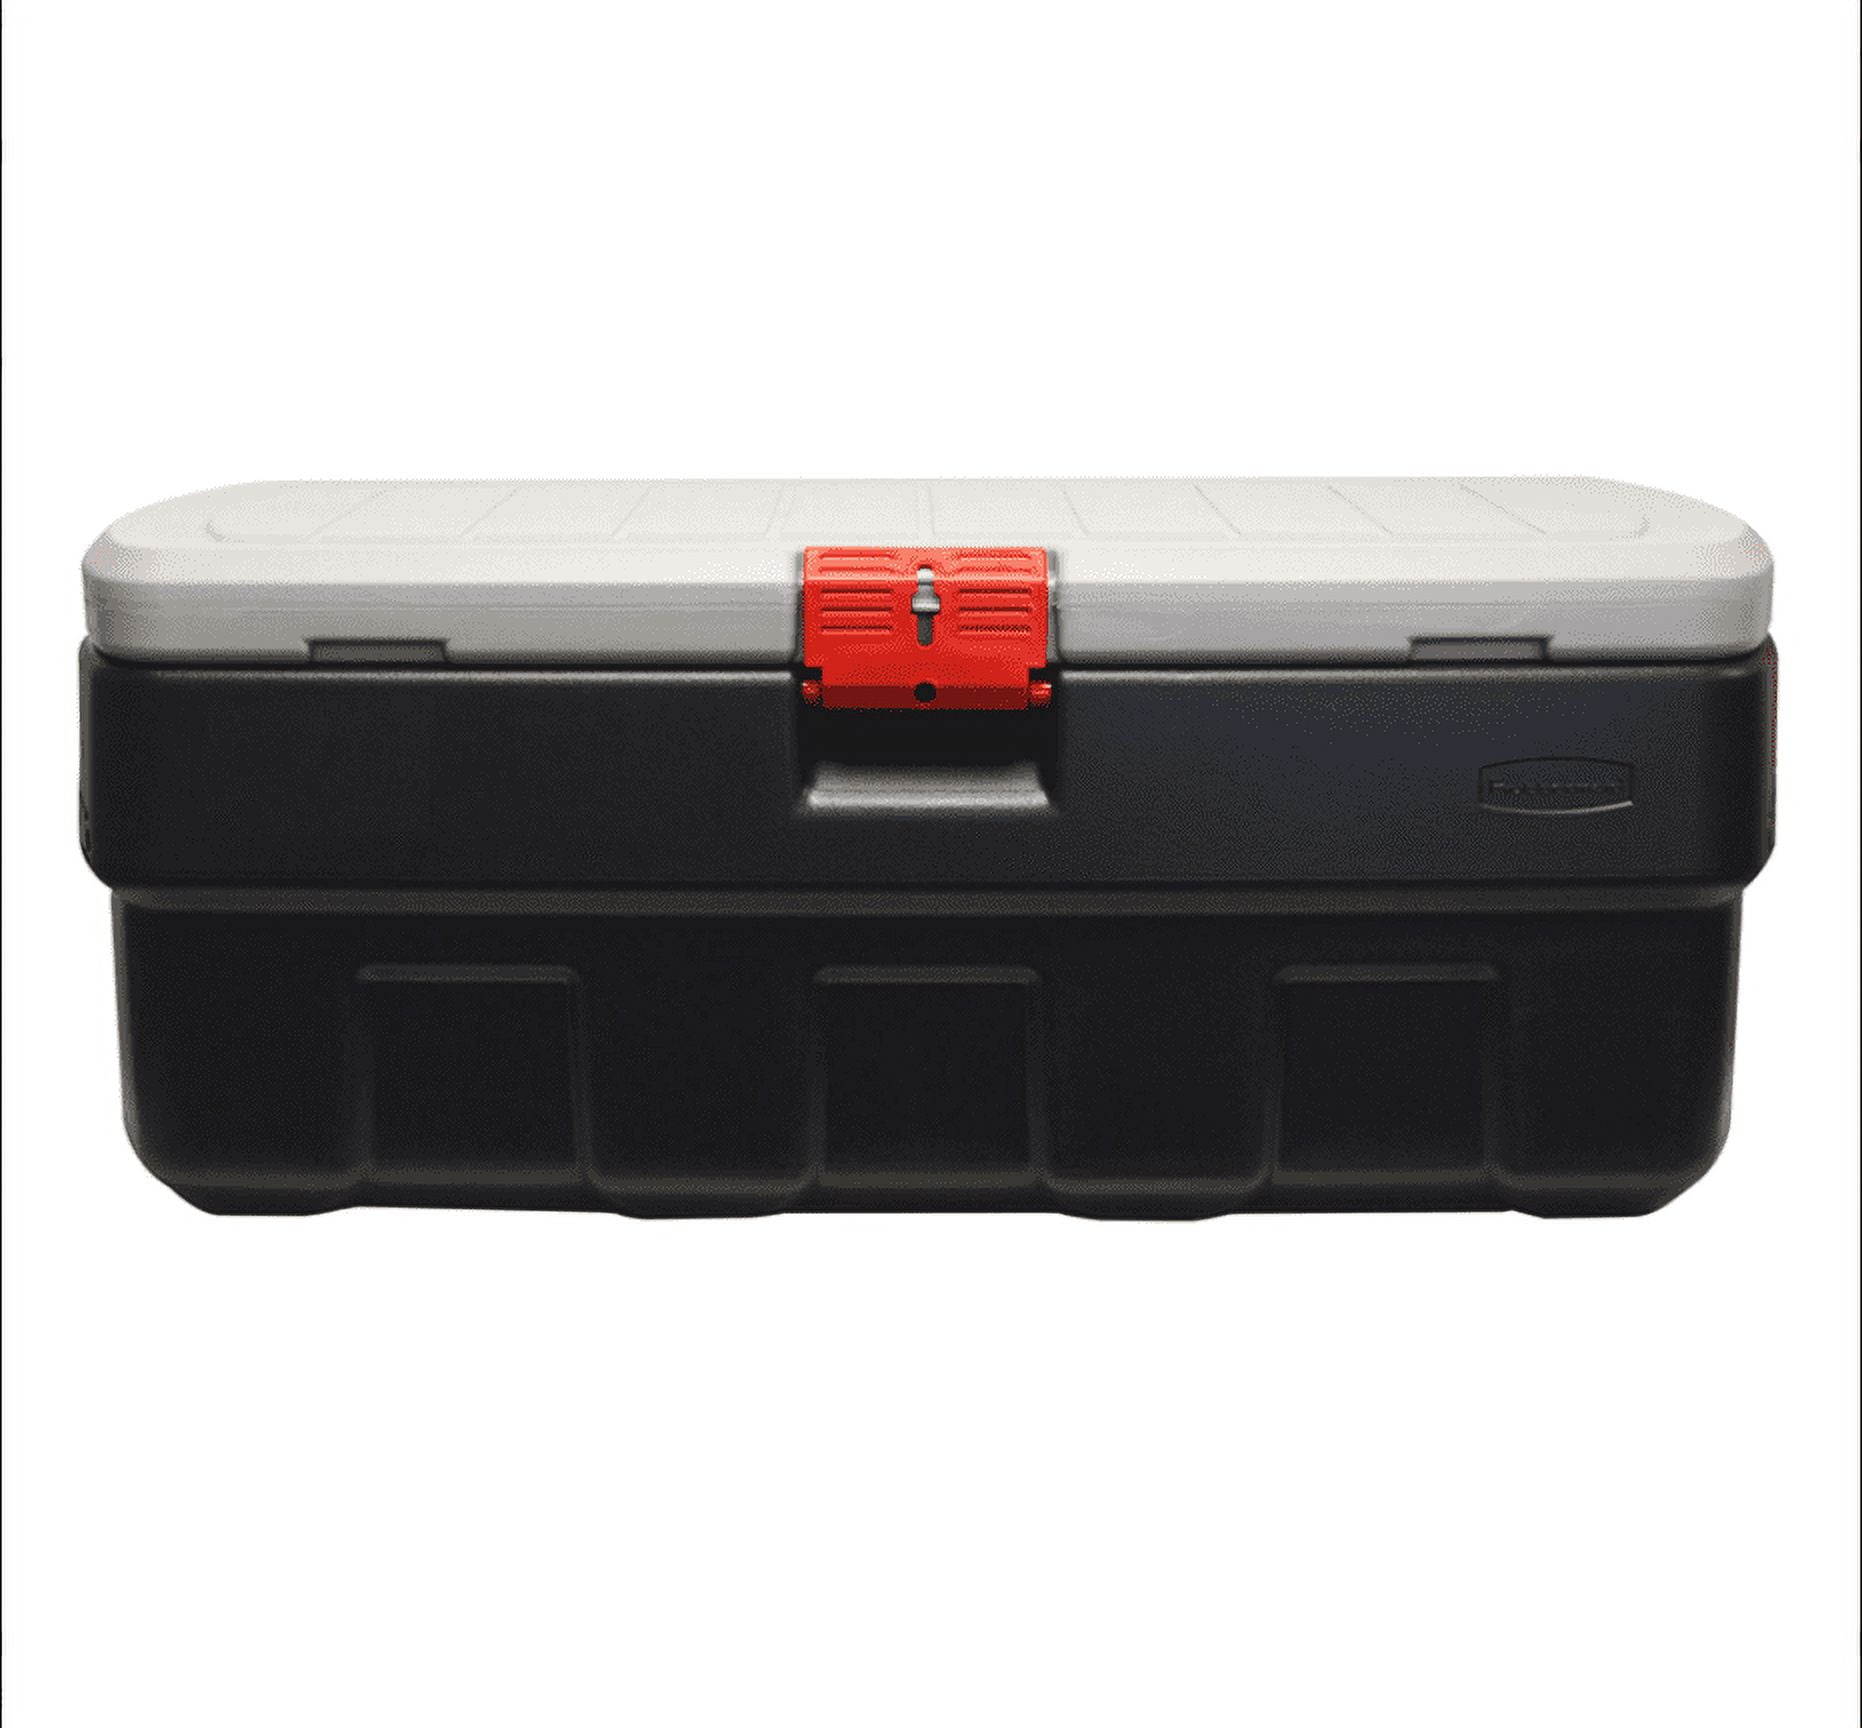 Rubbermaid action packer container model 1171 for Sale in Queens